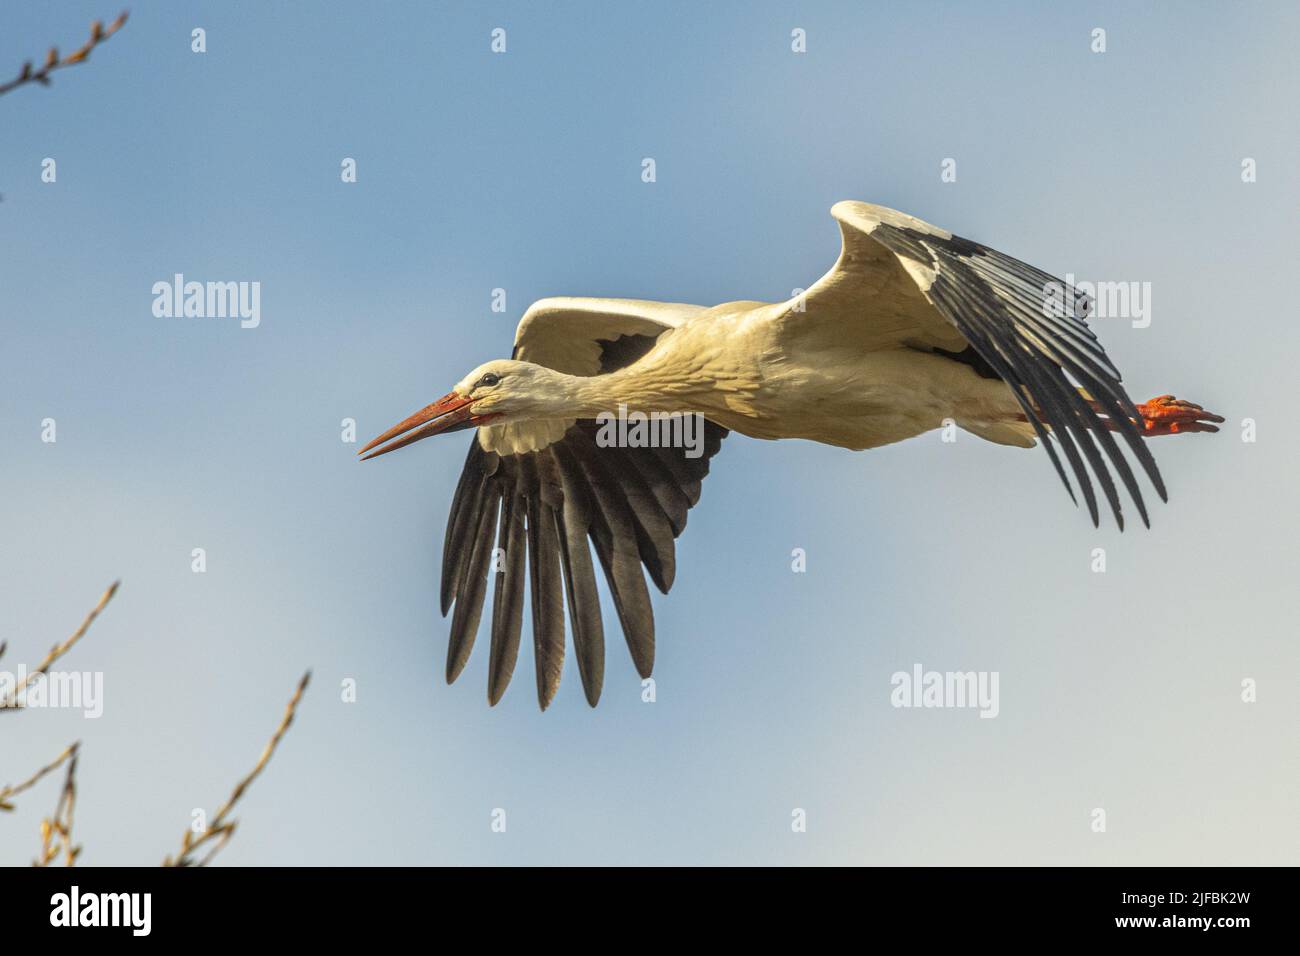 France, Somme, Baie de Somme, Basse vallée de la Somme, Boismont, nesting of white storks (Ciconia ciconia - White Stork) in spring. A pair starts nesting on an existing nest. Passage of birds in flight near the site which shelters several nests Stock Photo